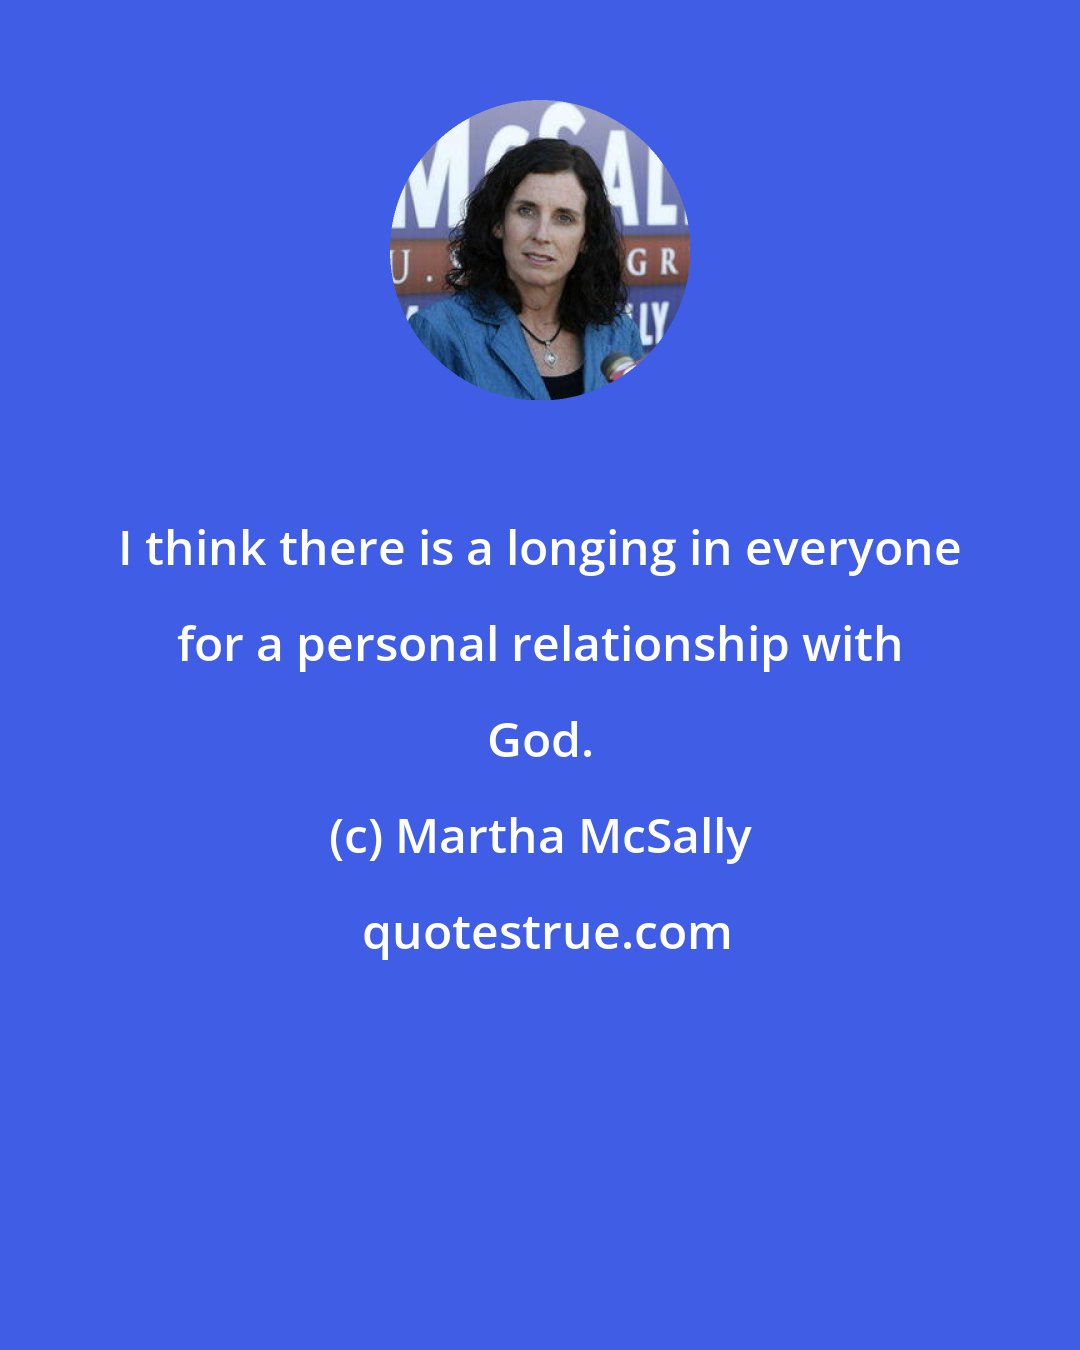 Martha McSally: I think there is a longing in everyone for a personal relationship with God.